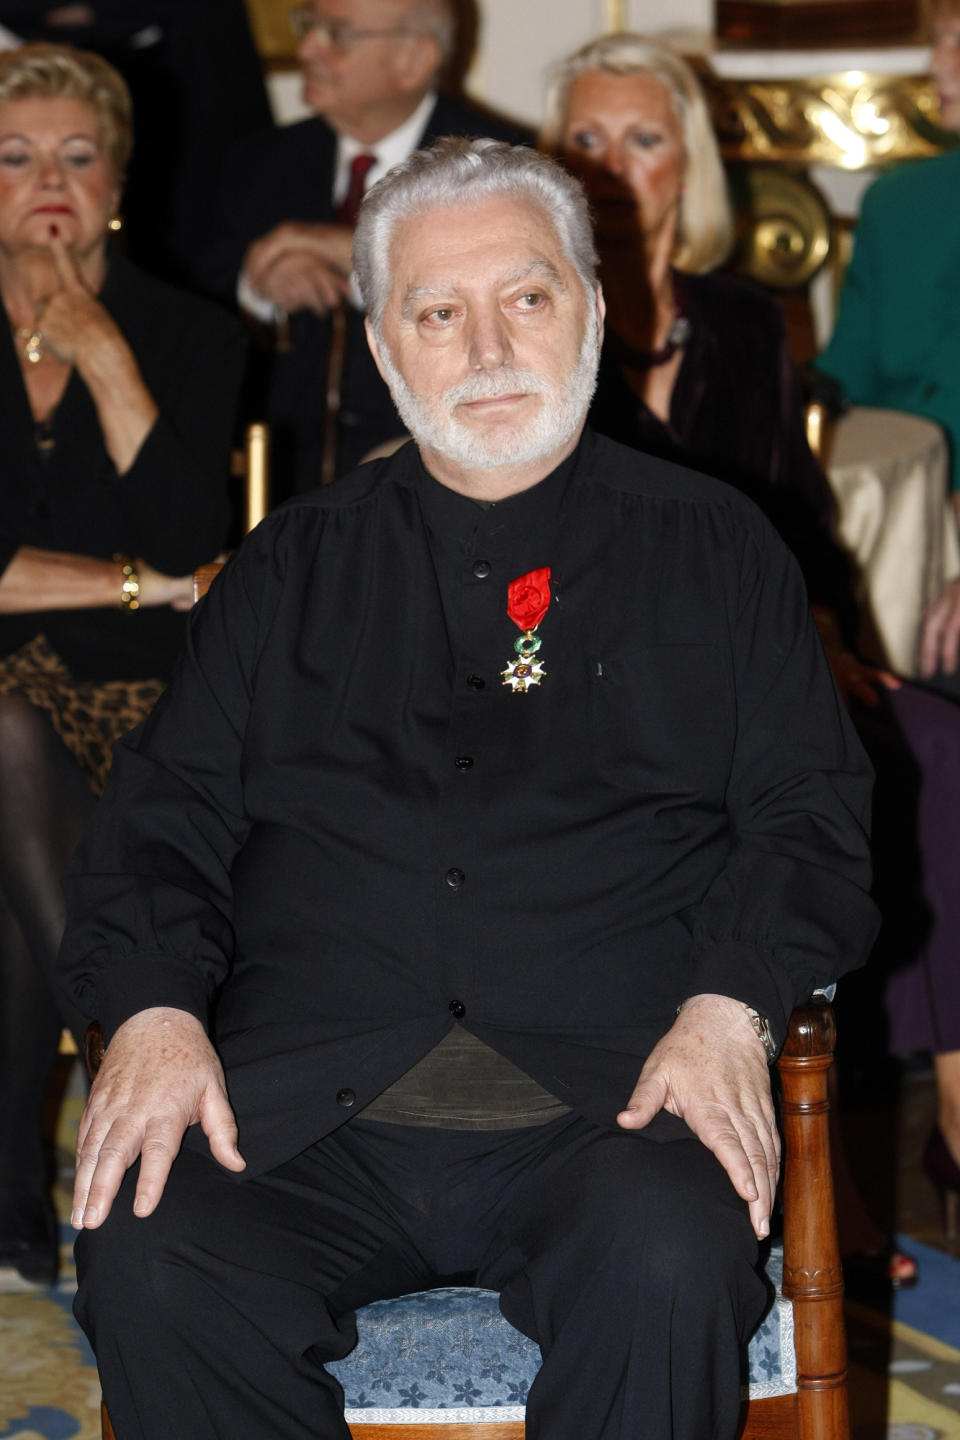 FILE - Fashion designer Paco Rabanne sits after being awarded the Legion of Honor by French Culture Minister Frederic Mitterrand in on April 16, 2010 Paris. The Spanish-born pace-setting designer known for perfumes sold worldwide and his metallic, space-age fashions, has died, the group that owns his fashion house announced on its website Friday Feb.3, 2023. He was 88. (AP Photo/Jacques Brinon, File)